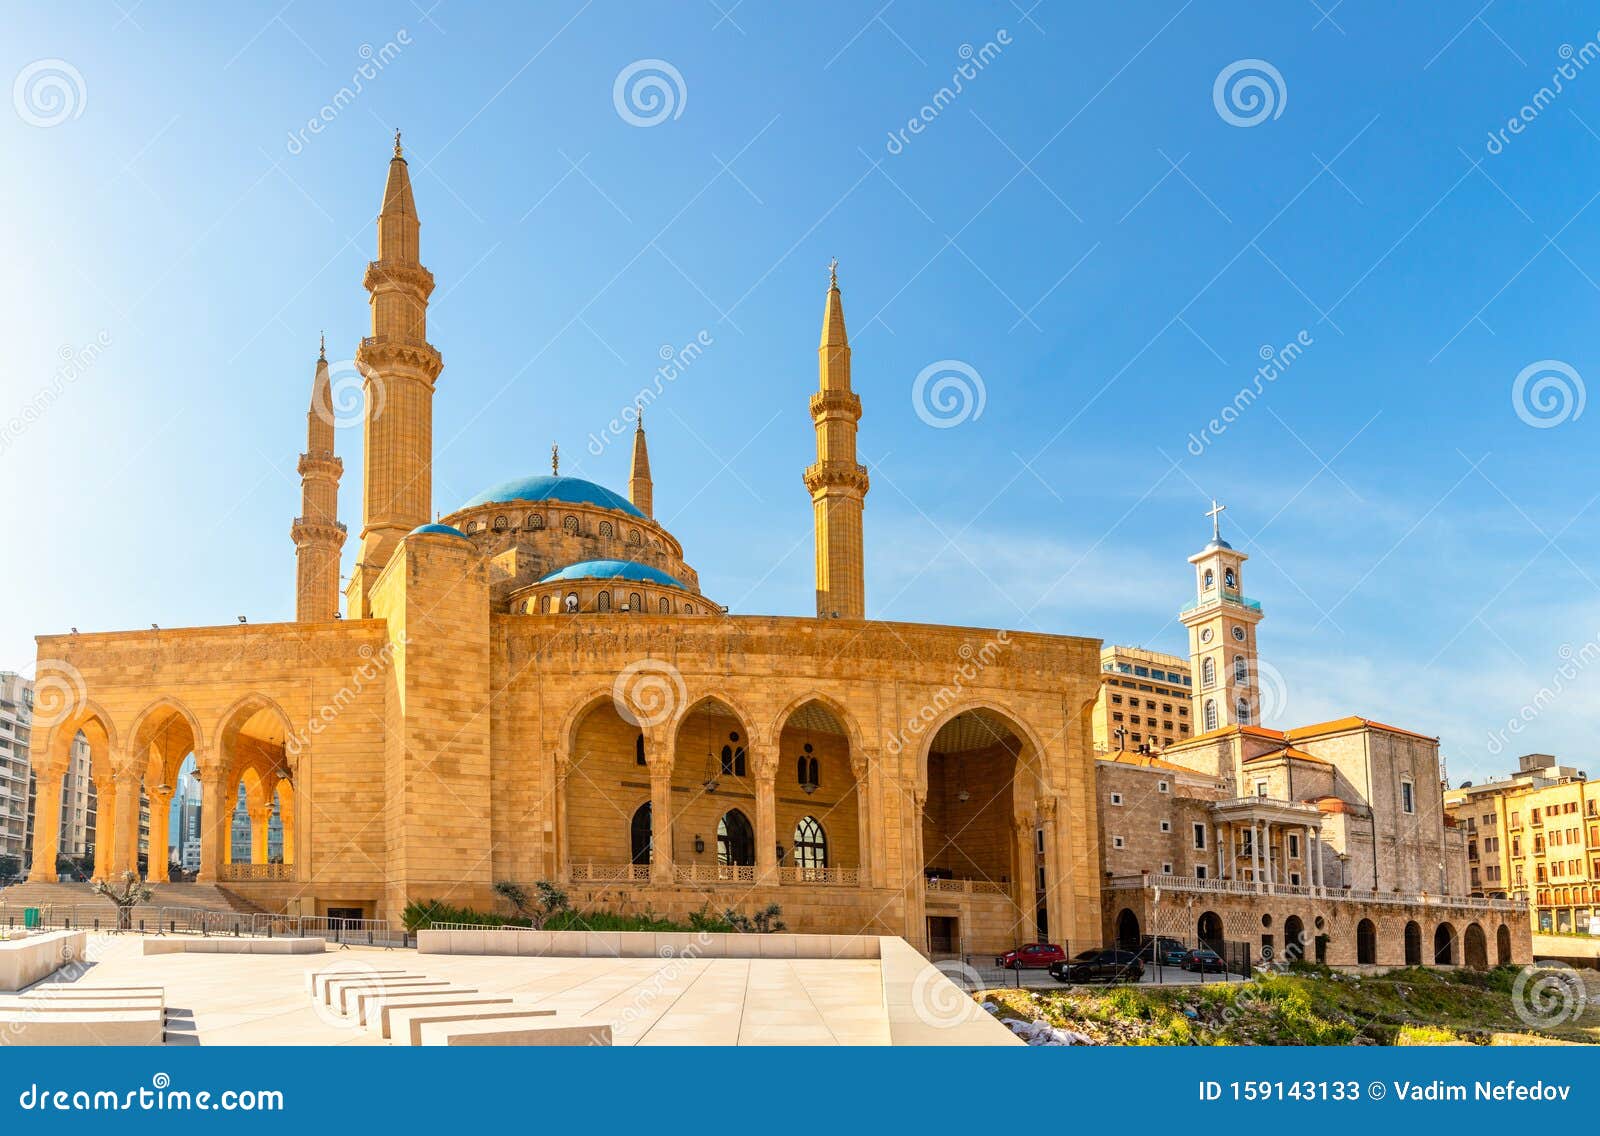 mohammad al-amin mosque and saint georges maronite cathedral in the center of beirut, lebanon